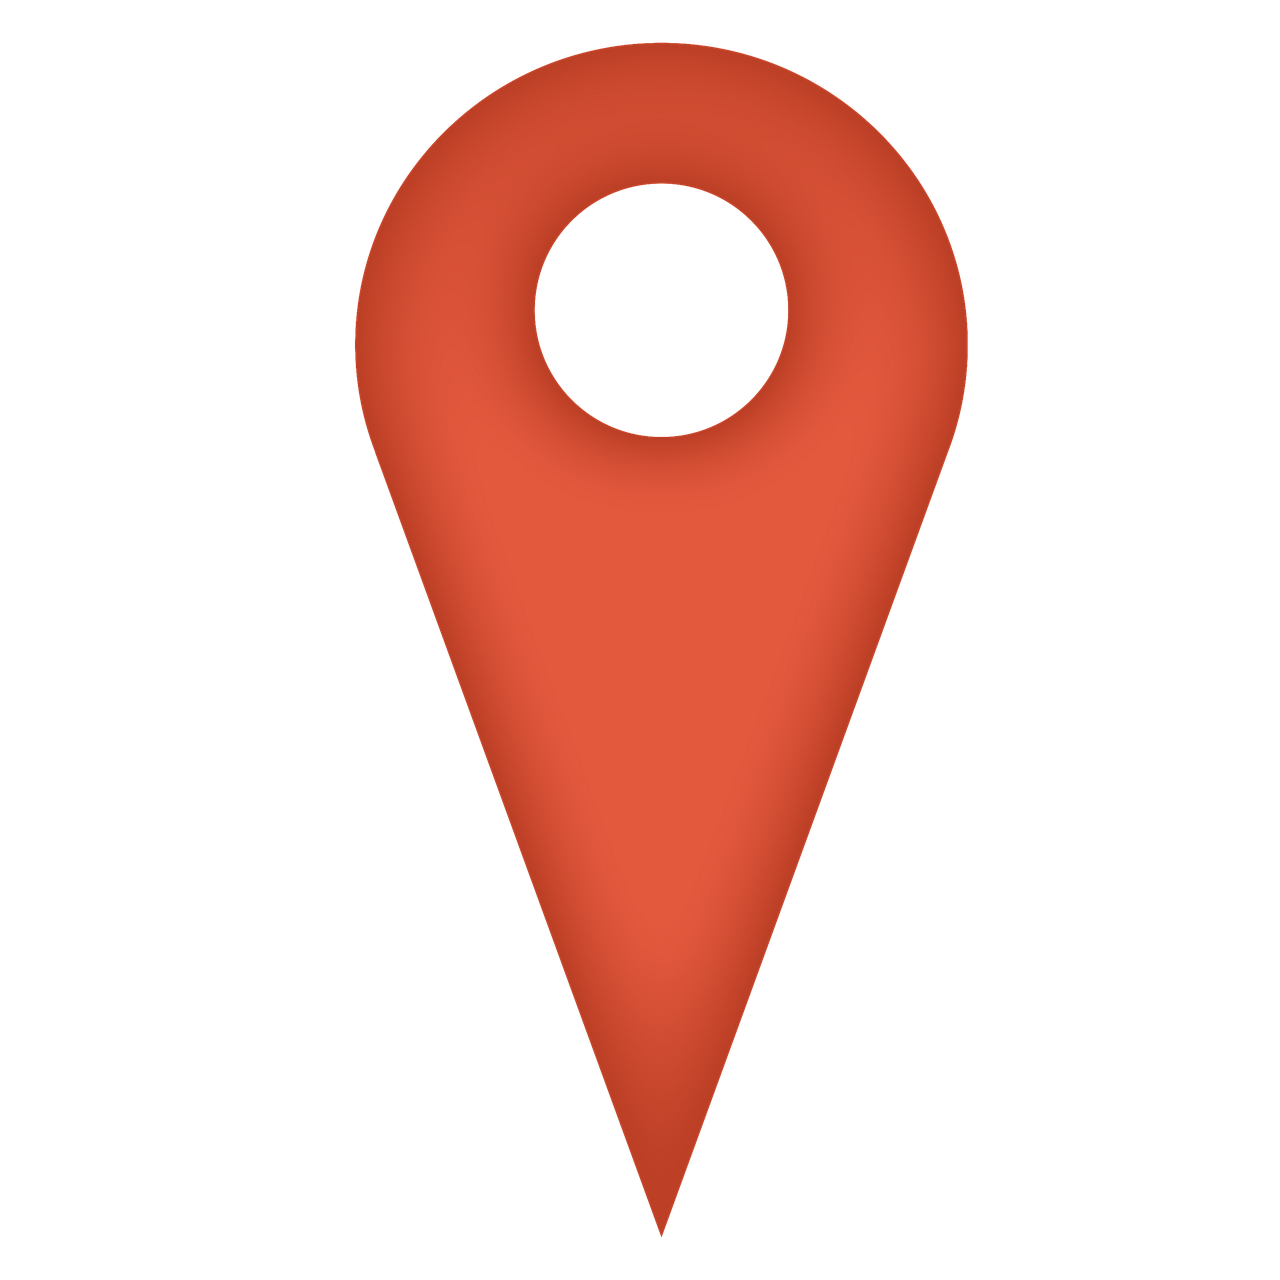 a red pin with a black circle on it, a digital rendering, regionalism, on a flat color black background, google maps, unknown, sign